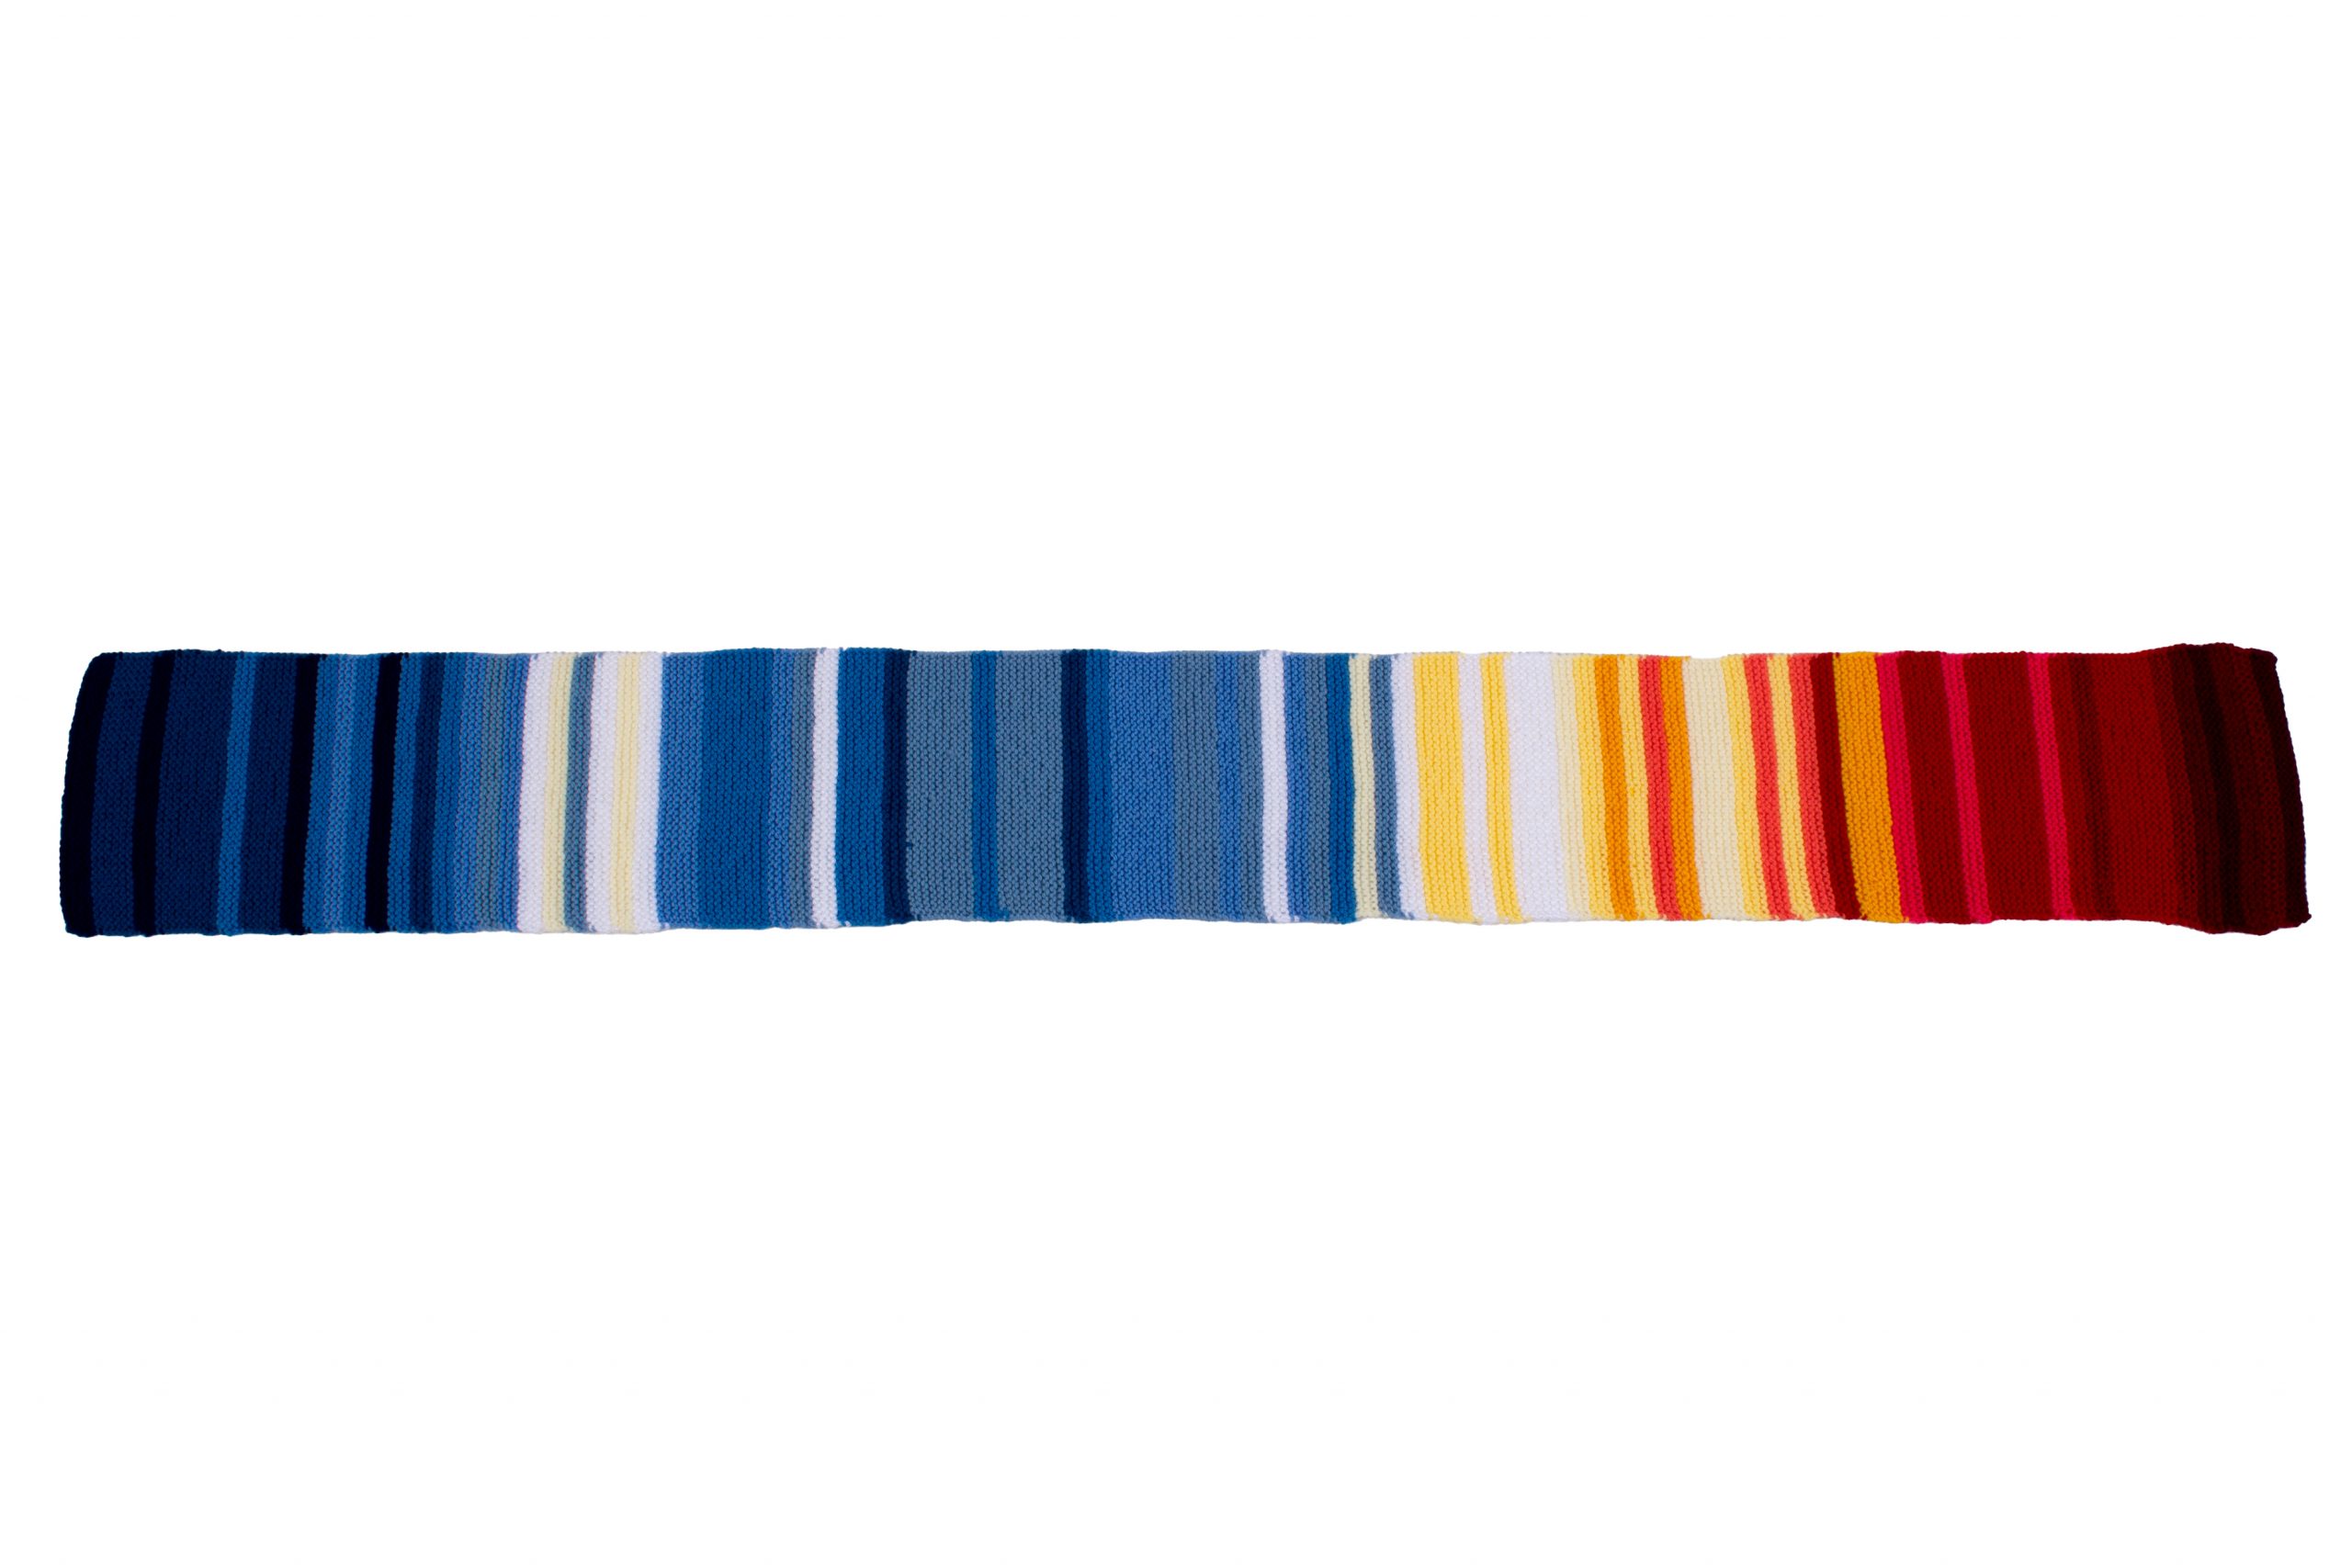 Striped scarf which looks like a spectrum, with shades of blue and white slowly moving towards varying shades of red.